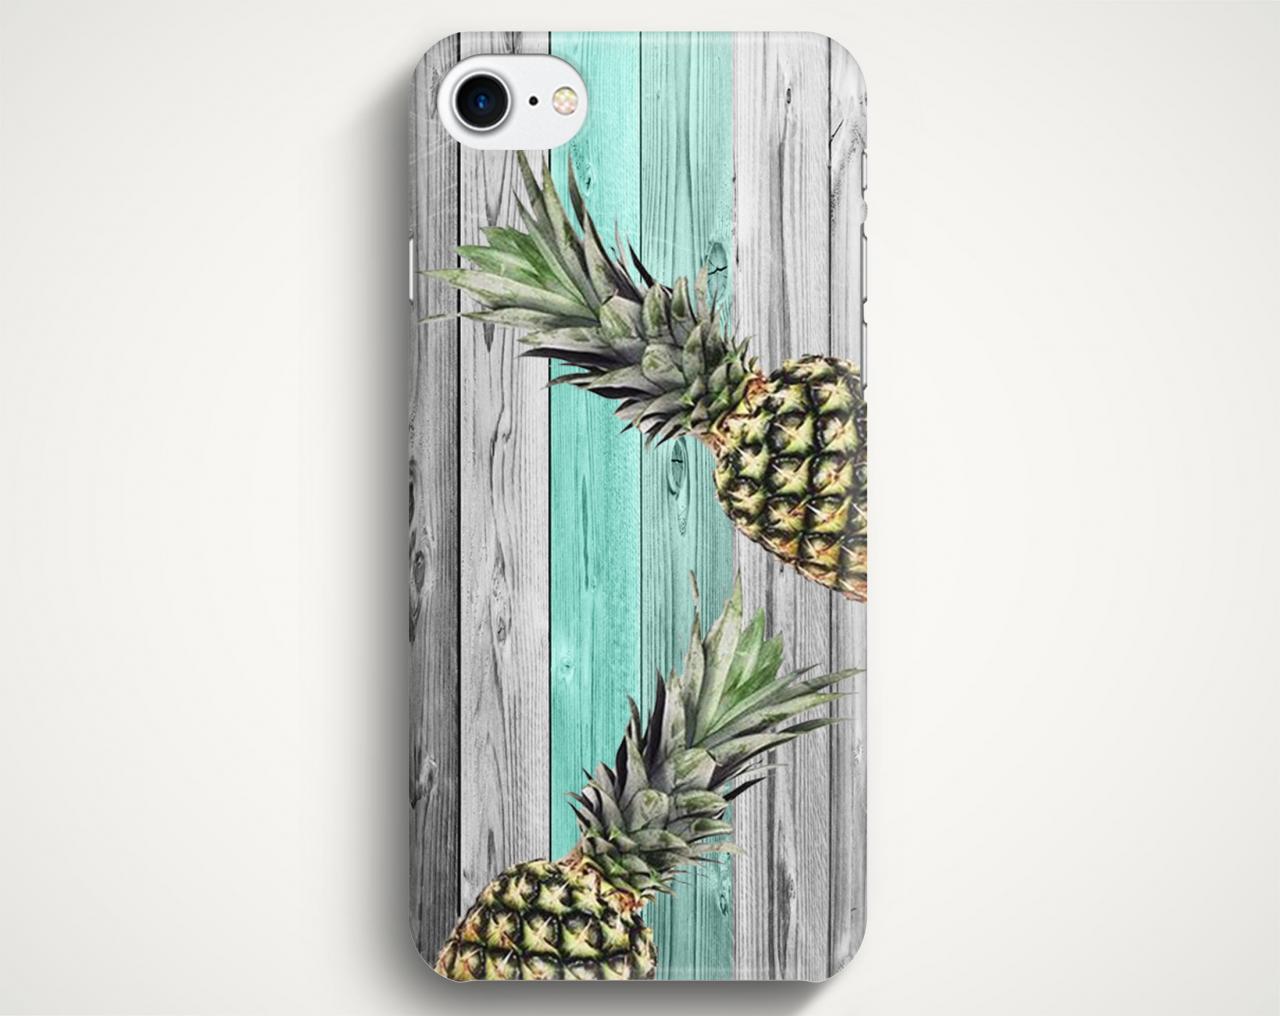 Pineapple Wood Texture Case For Iphone 7 Iphone 7 Plus Samsung Galaxy S8 Galaxy S7 Galaxy A3 Galaxy A5 Galaxy A7 Lg G6 Lg G5 Htc 10